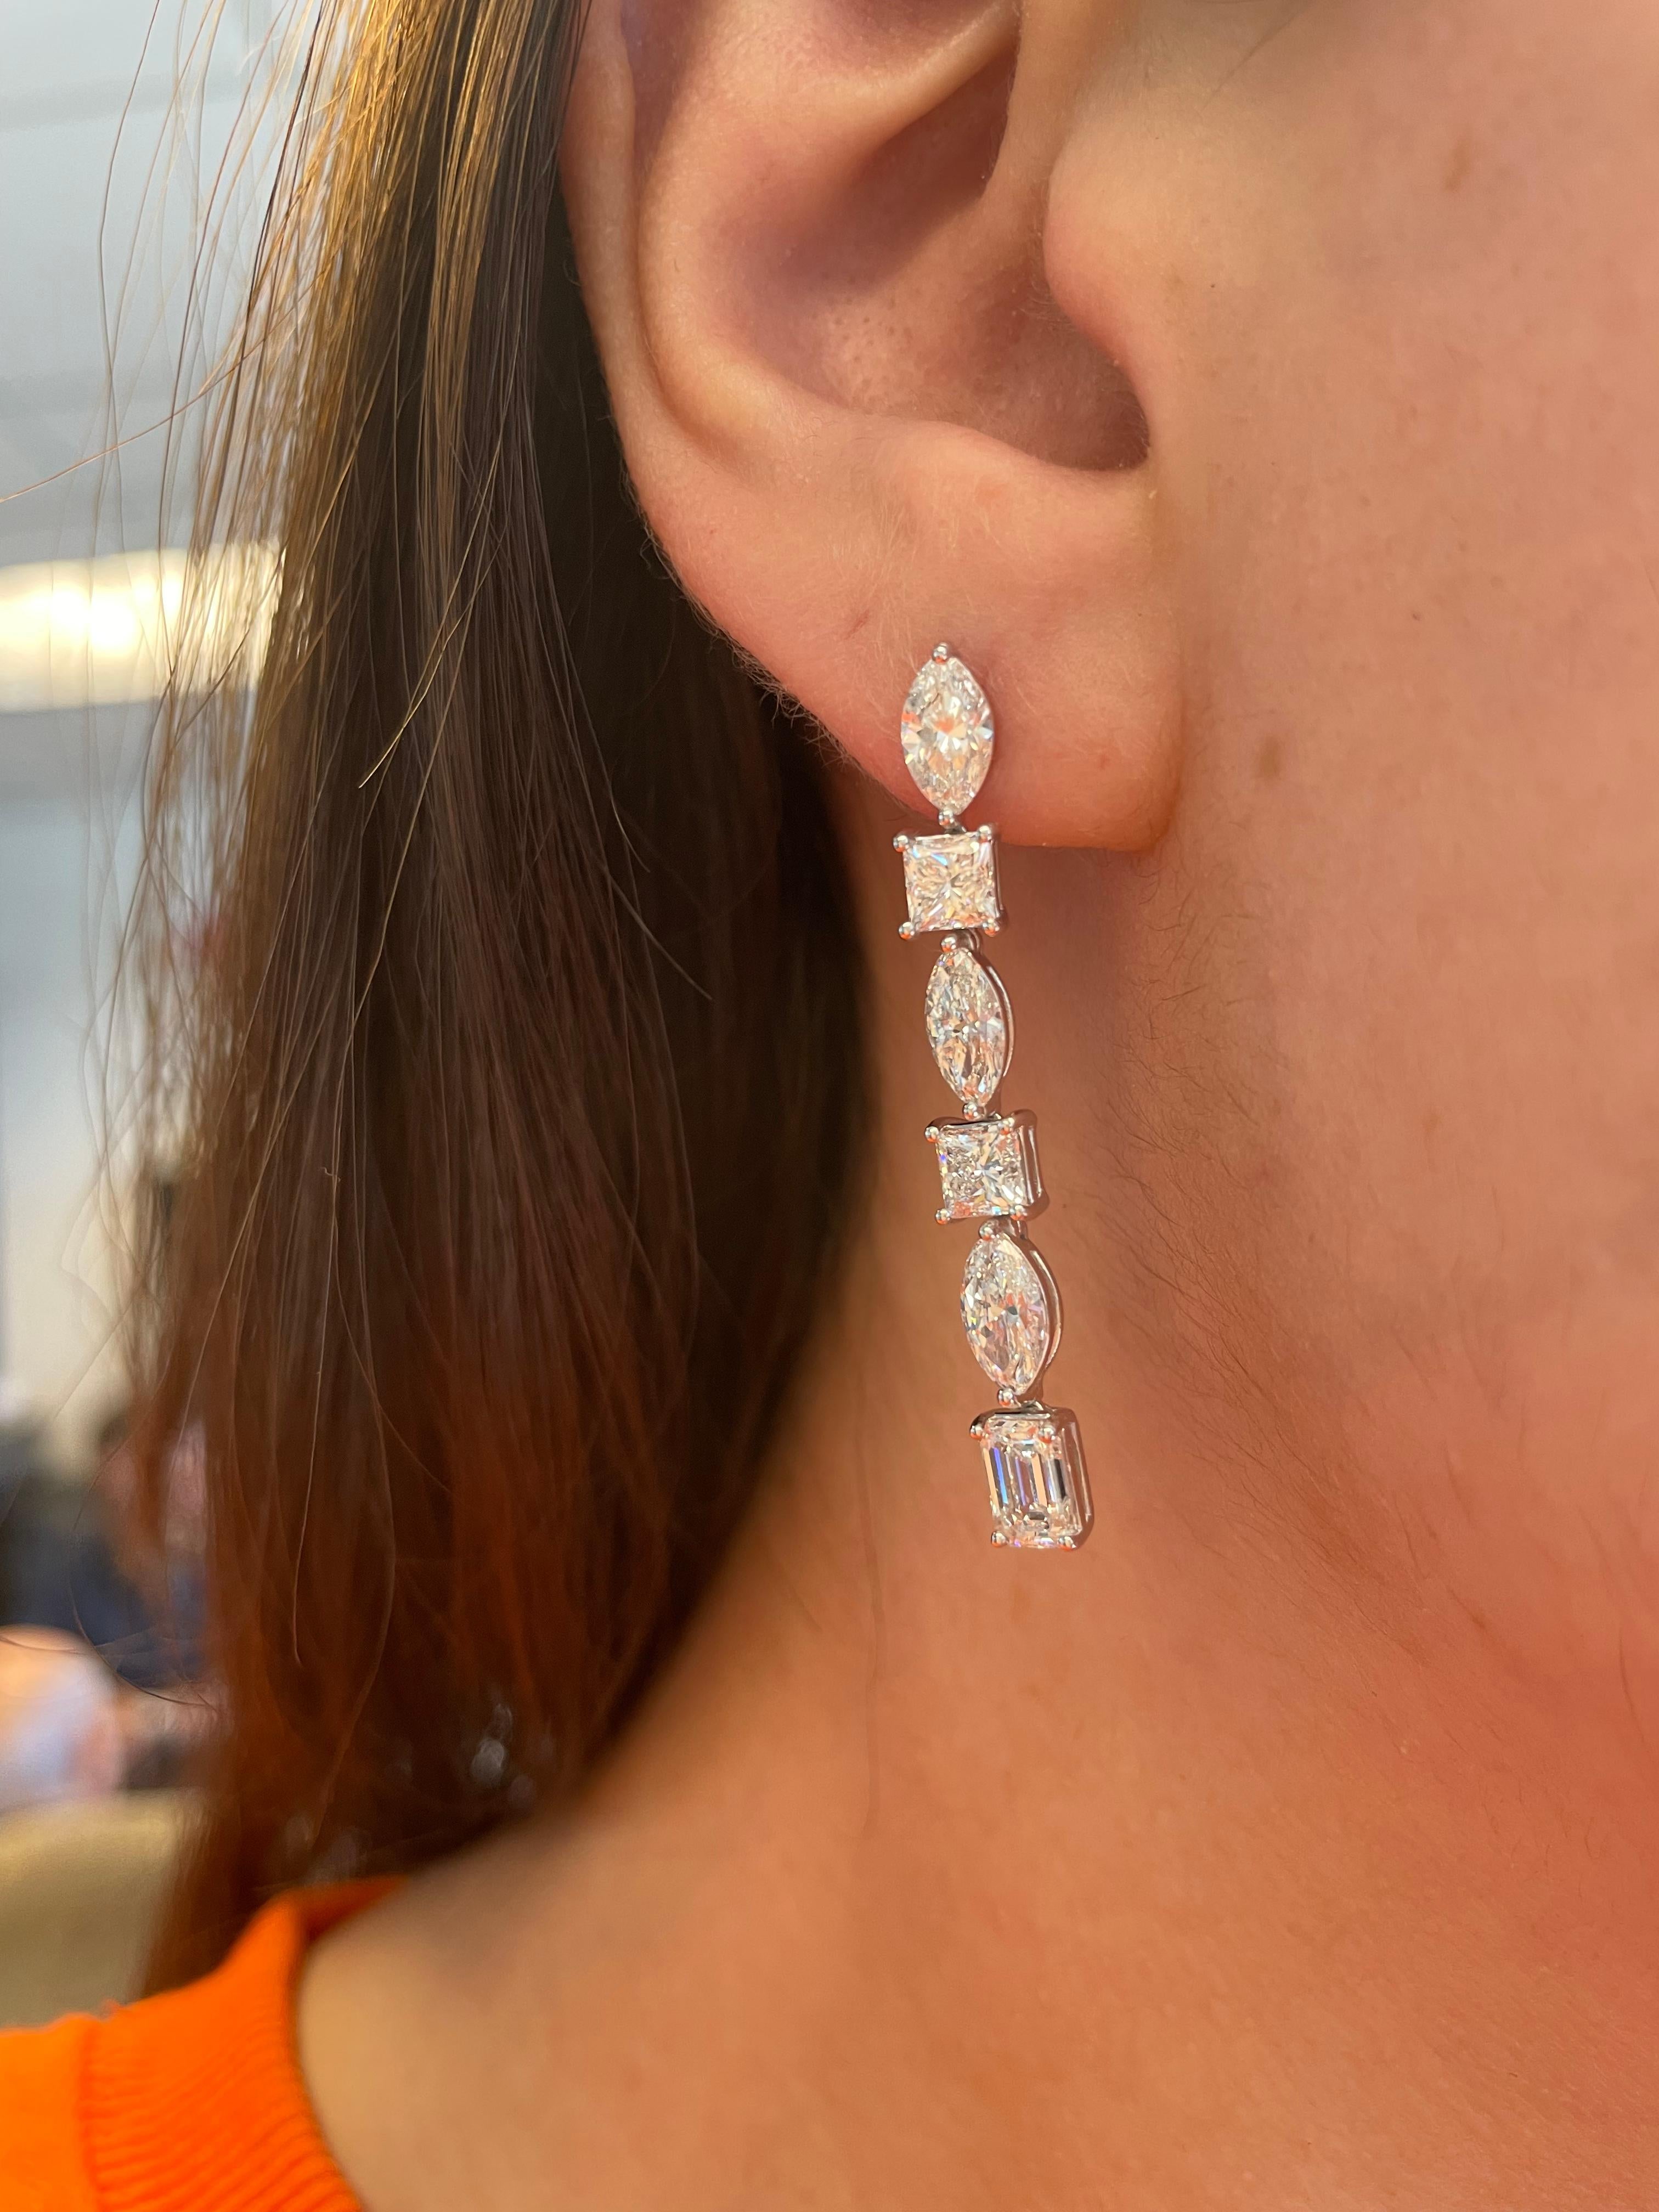 Stunning multi diamond dangling diamond earrings. By Alexander Beverly Hills.
6.52 carats total diamond weight.
2 emerald cut diamonds, 1.49 carats. Approximately G/H color and VS clarity. 4 princess cut diamonds, 1.98 carats. Approximately G/H